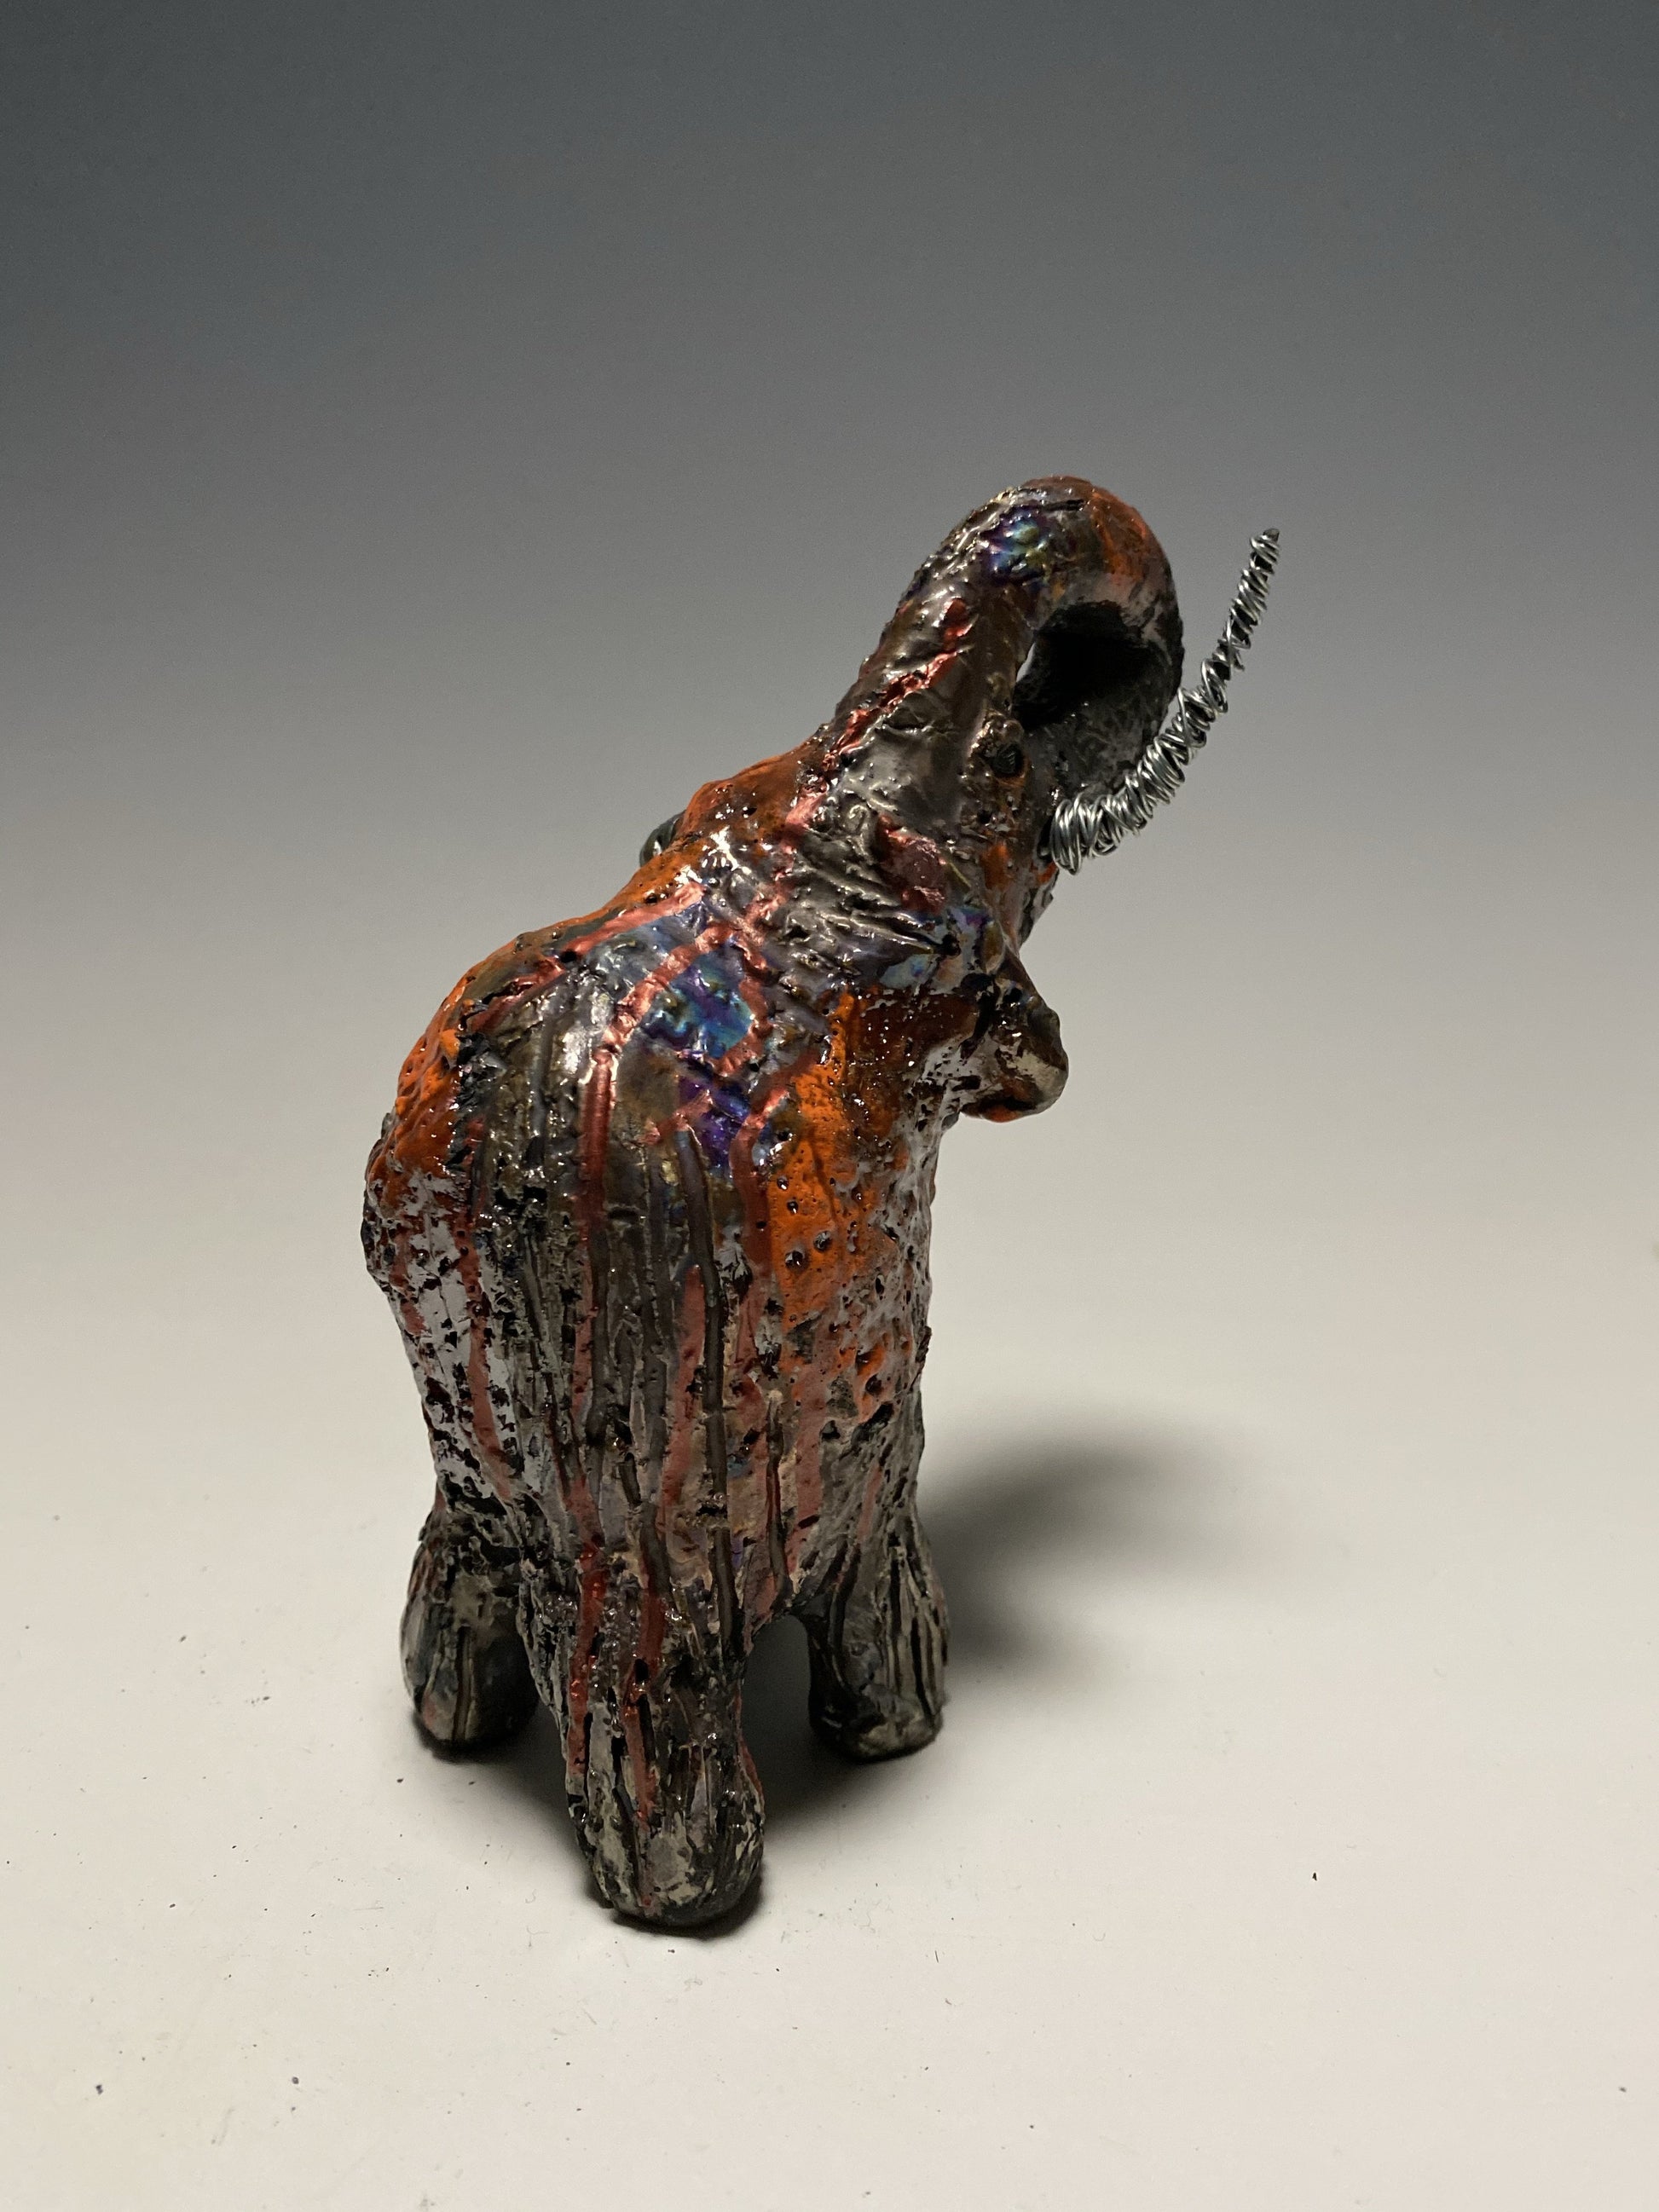 Raku Elephant Have you HERD!!!!!!  Just one of these lovely Raku Fired Elephant will make an excellent gift for your  friend, sorority or for your home’ special place centerpiece.   6" x 3" x 4" 11 ozs. Beautiful metallic orange raku elephant For decorative purposely only